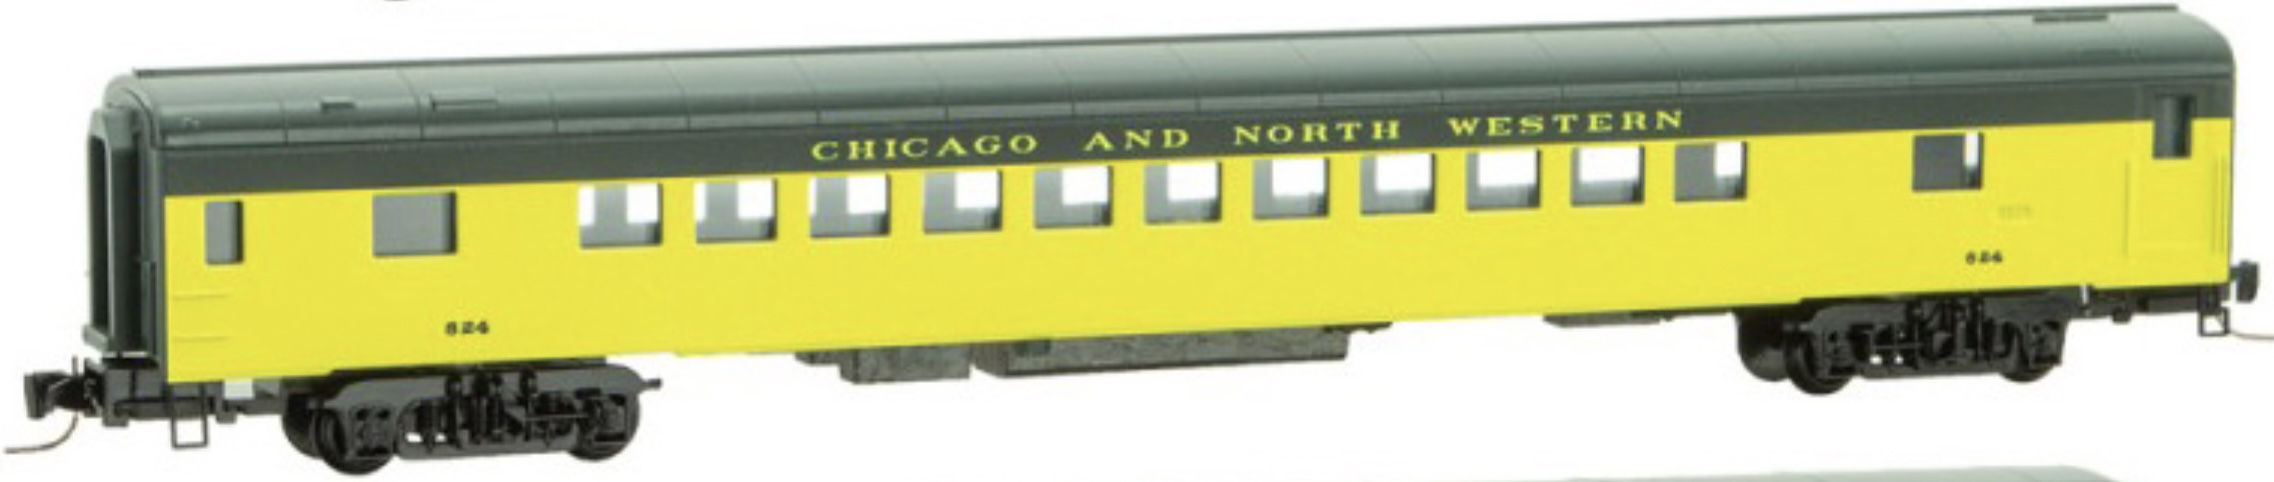 Z Scale - Micro-Trains - 552 53 220 - Passenger Car, Smoothside, Coach, 83-Foot - Chicago & North Western - 824